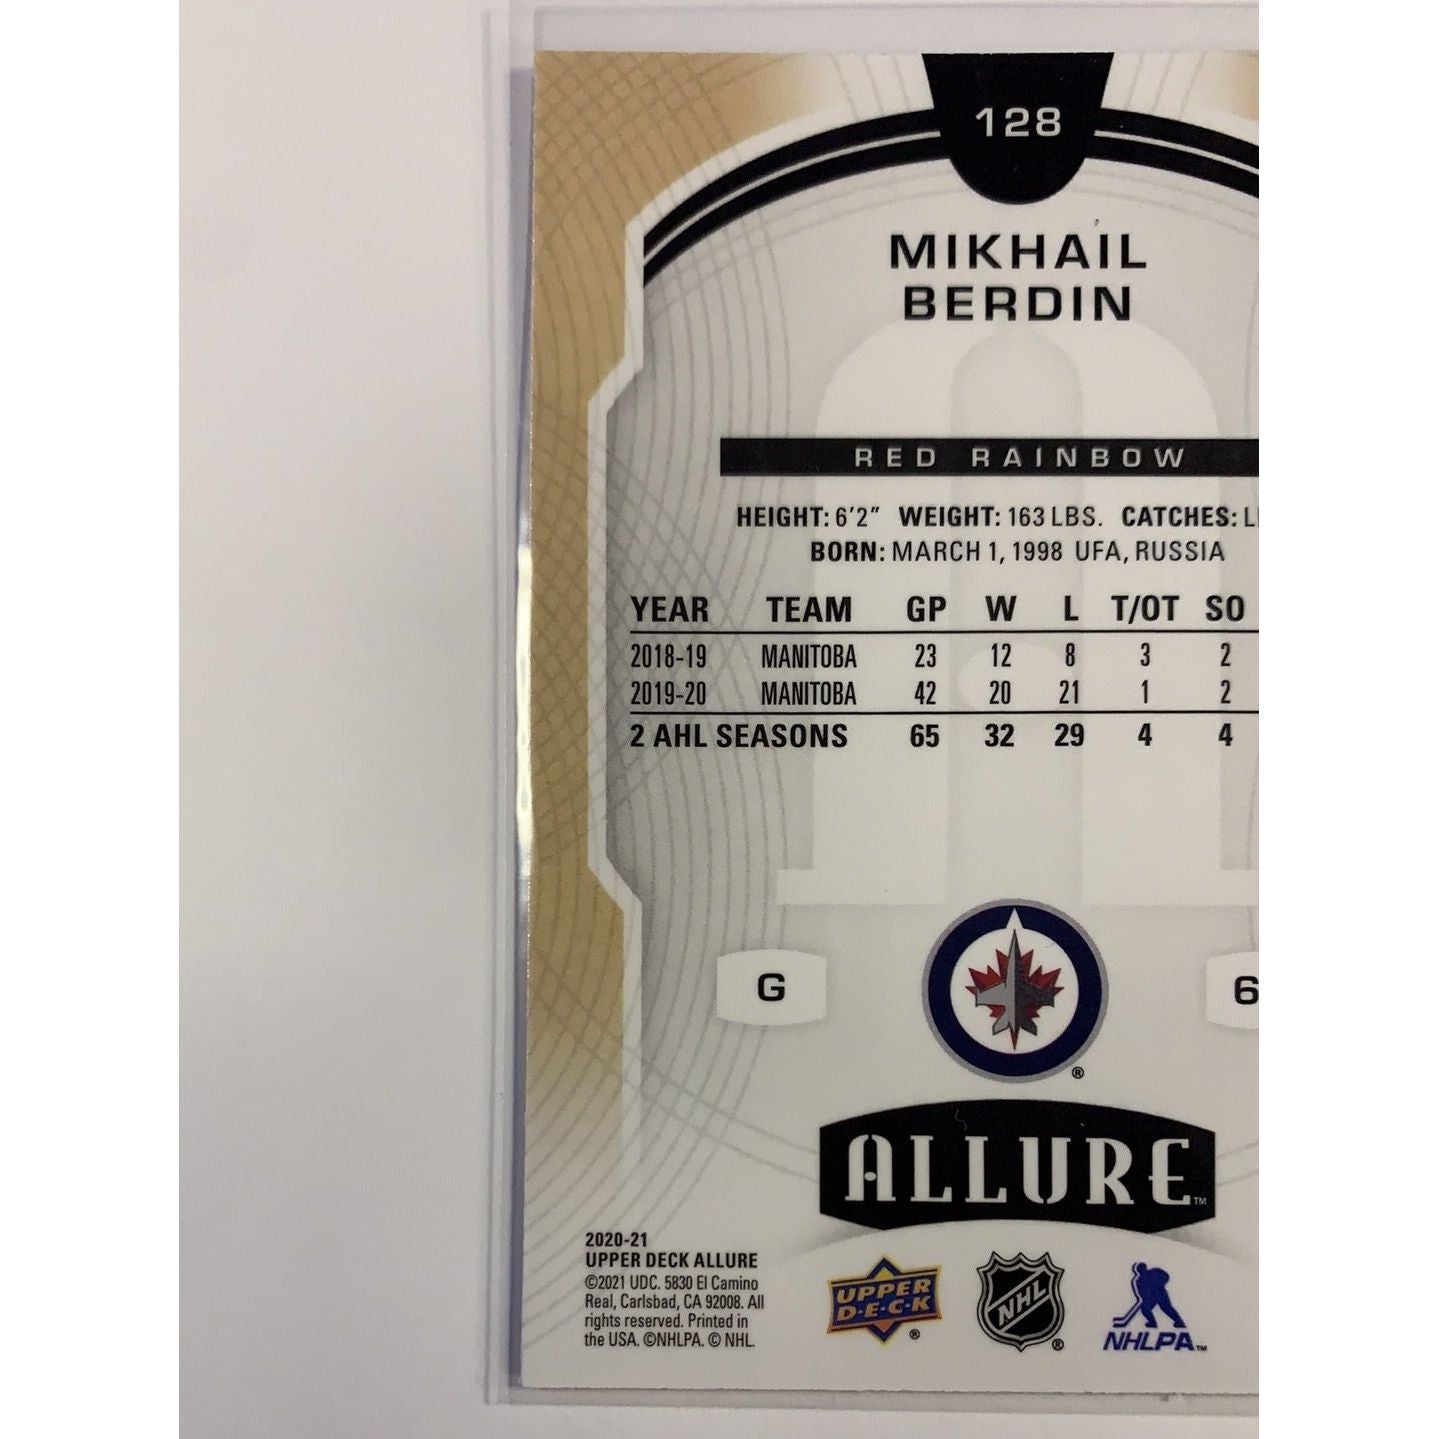  2020-21 Allure Mikhail Berdin Red Rainbow Rookie  Local Legends Cards & Collectibles